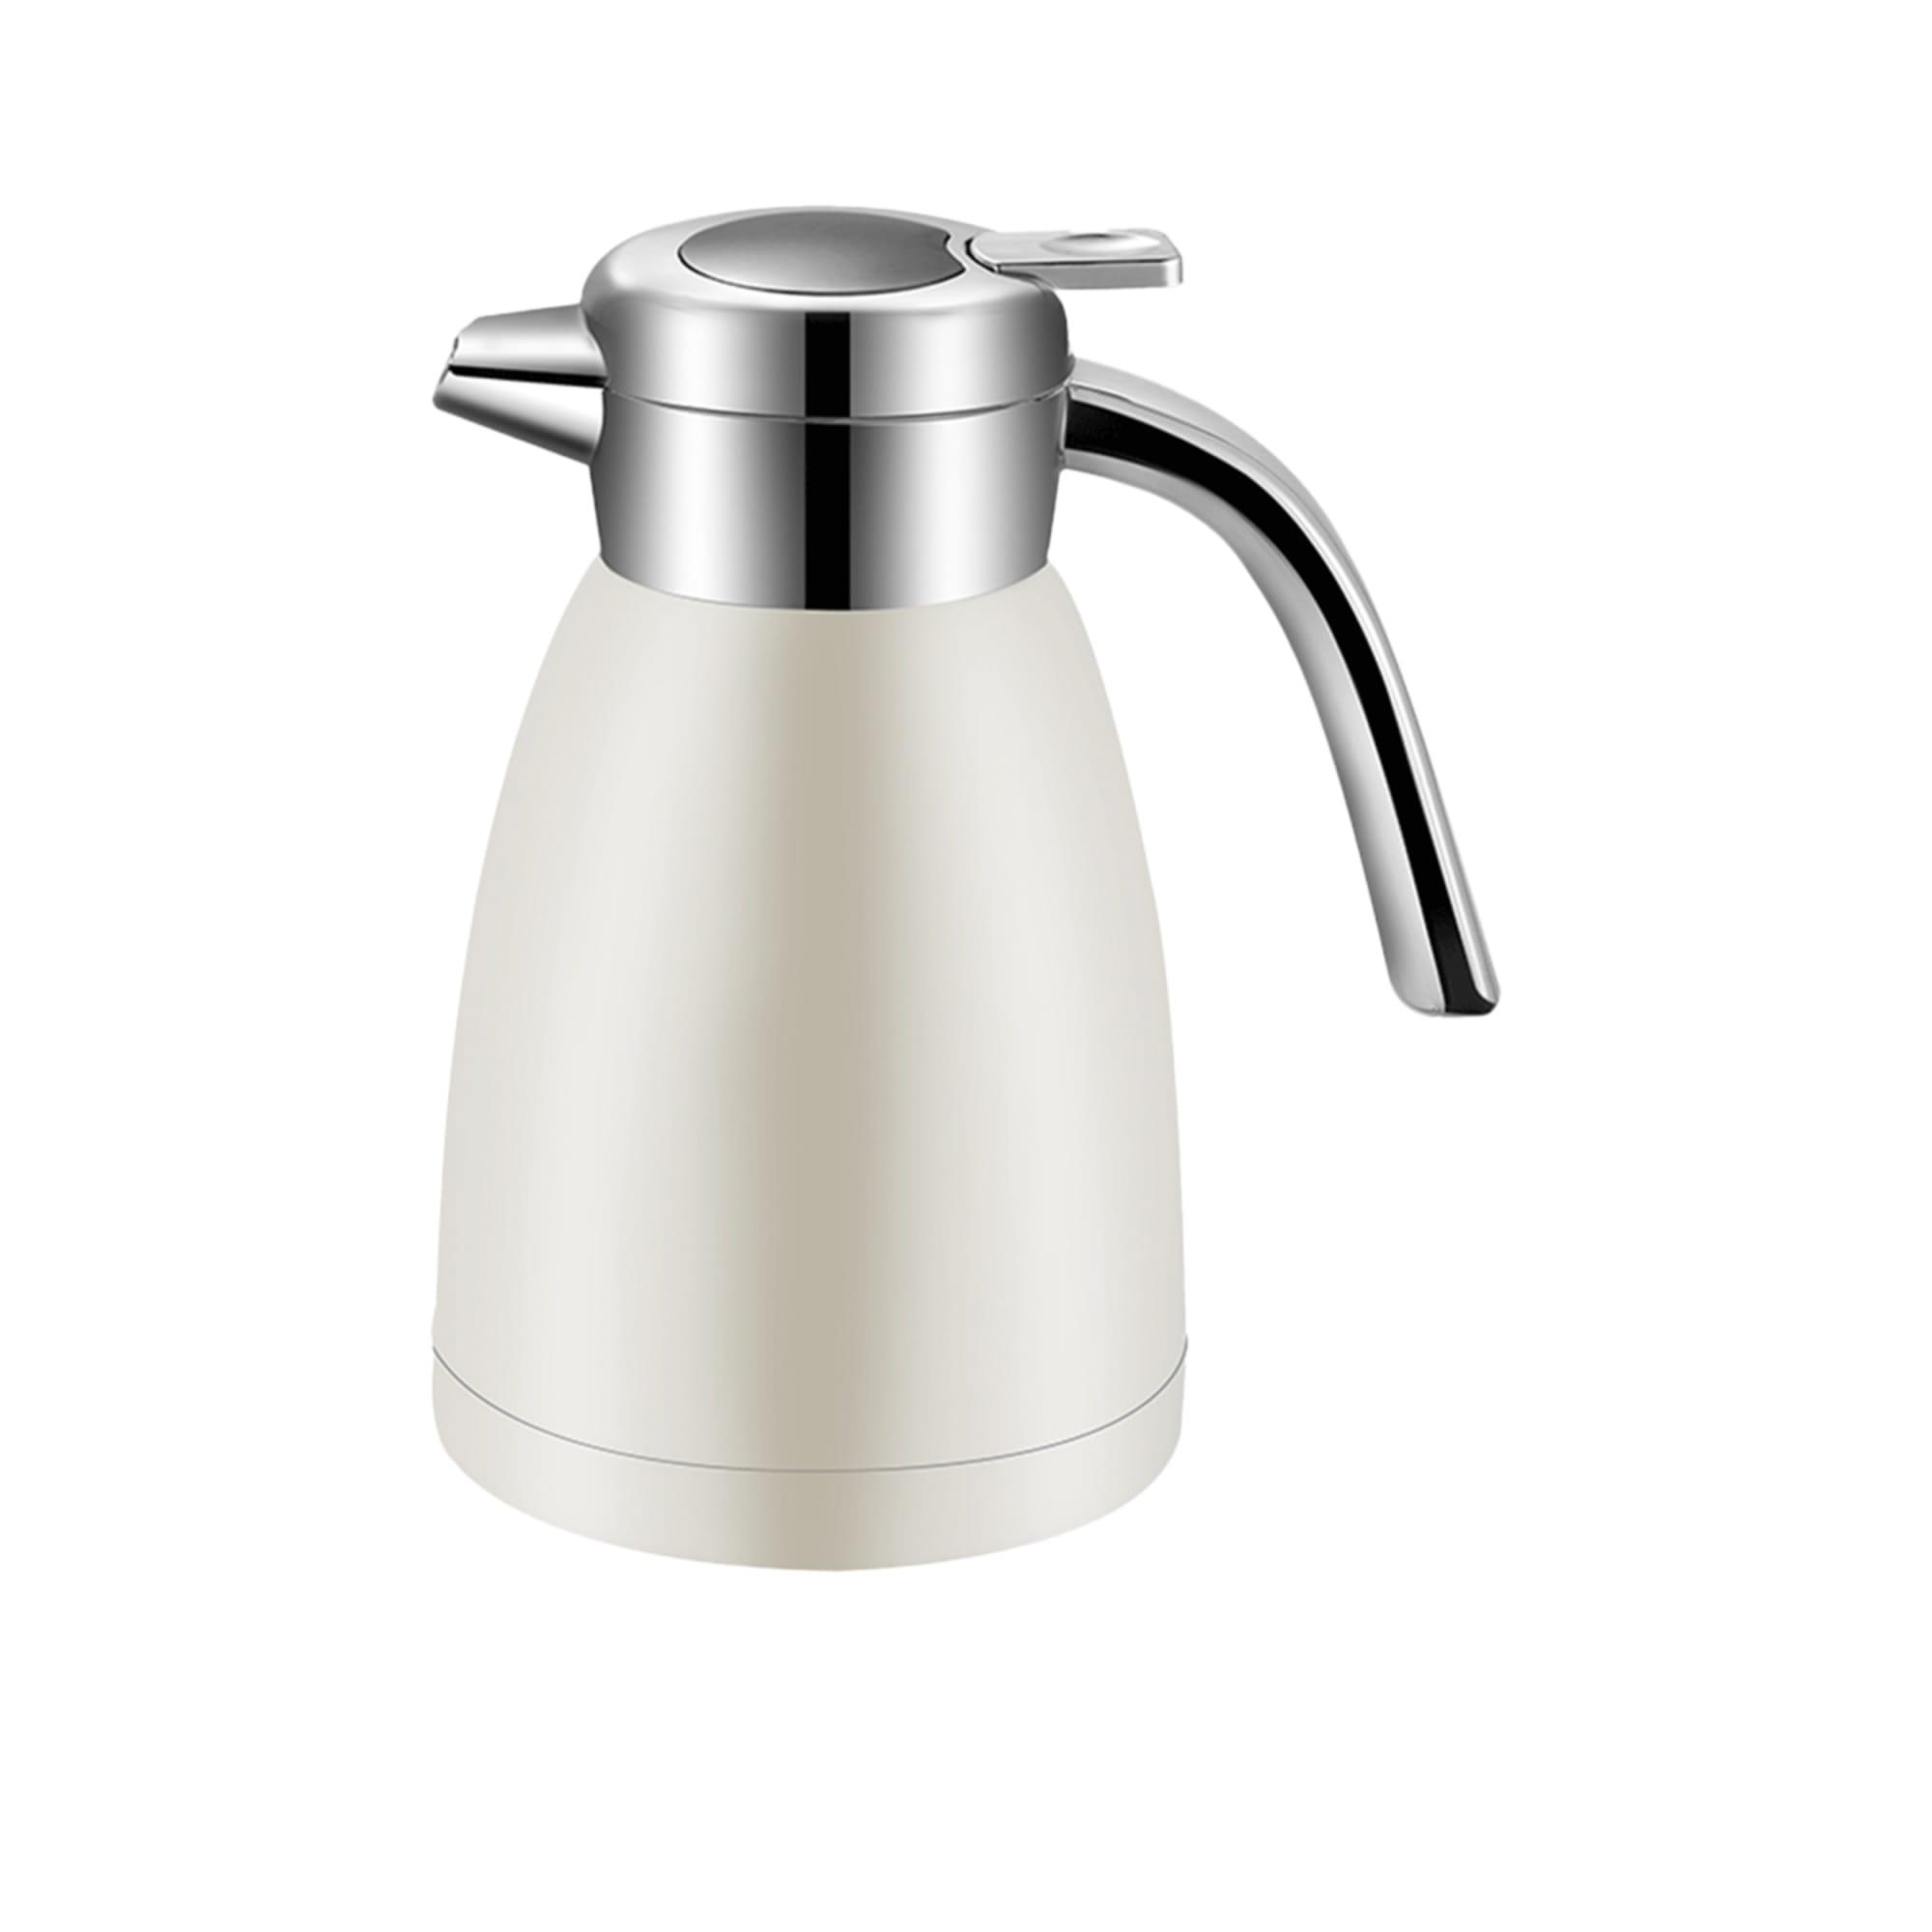 Soga Stainless Steel Insulated Kettle 1.2L White Image 1